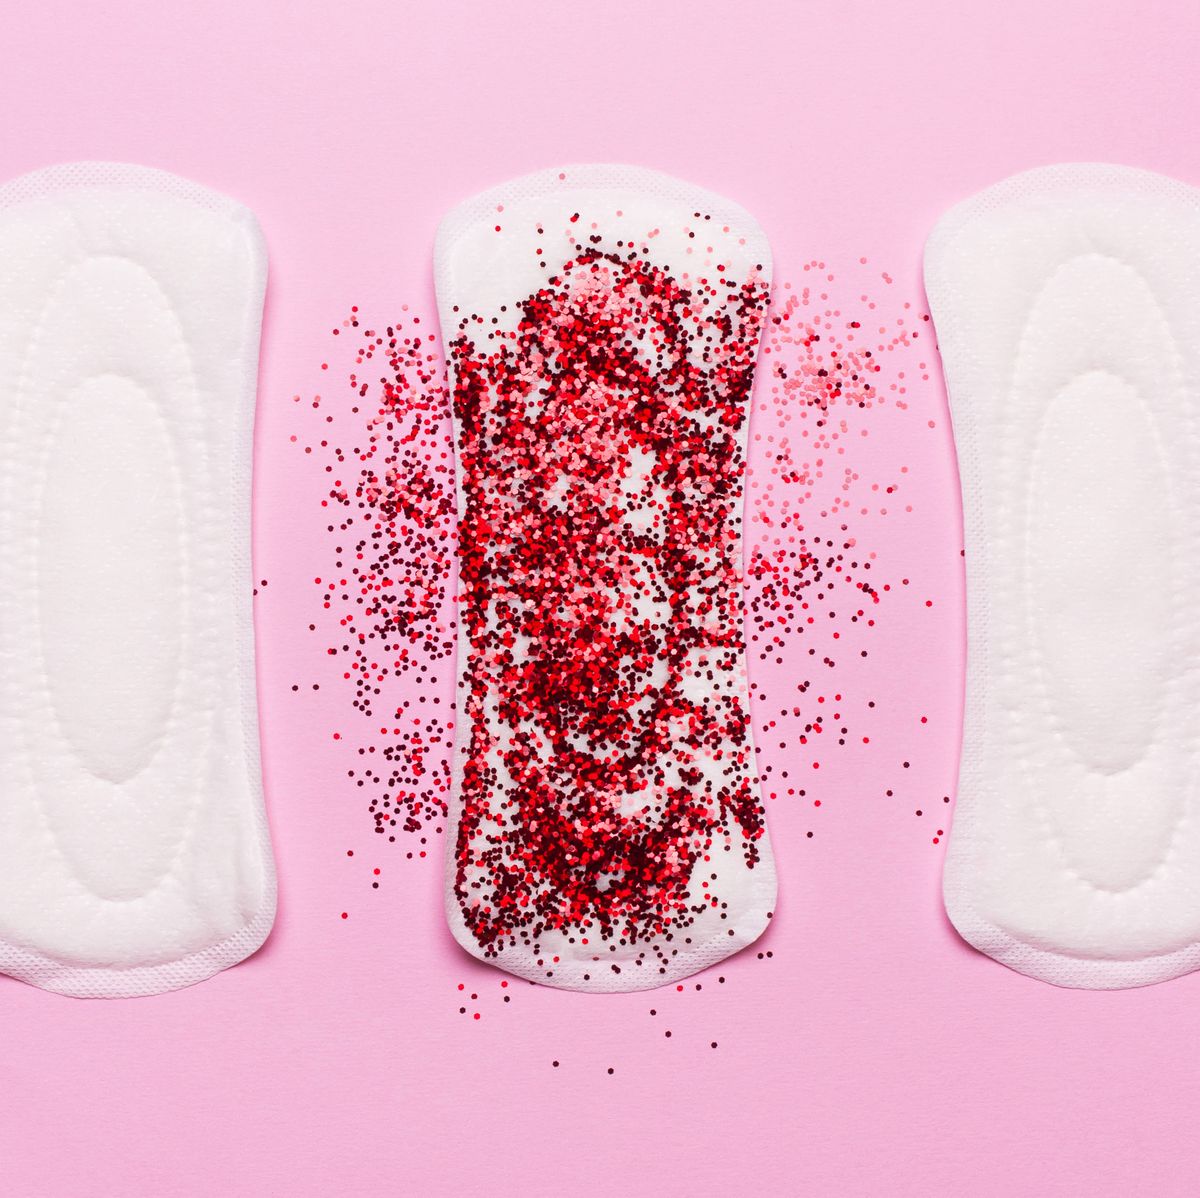 Do you notice changes in your period blood throughout your cycle